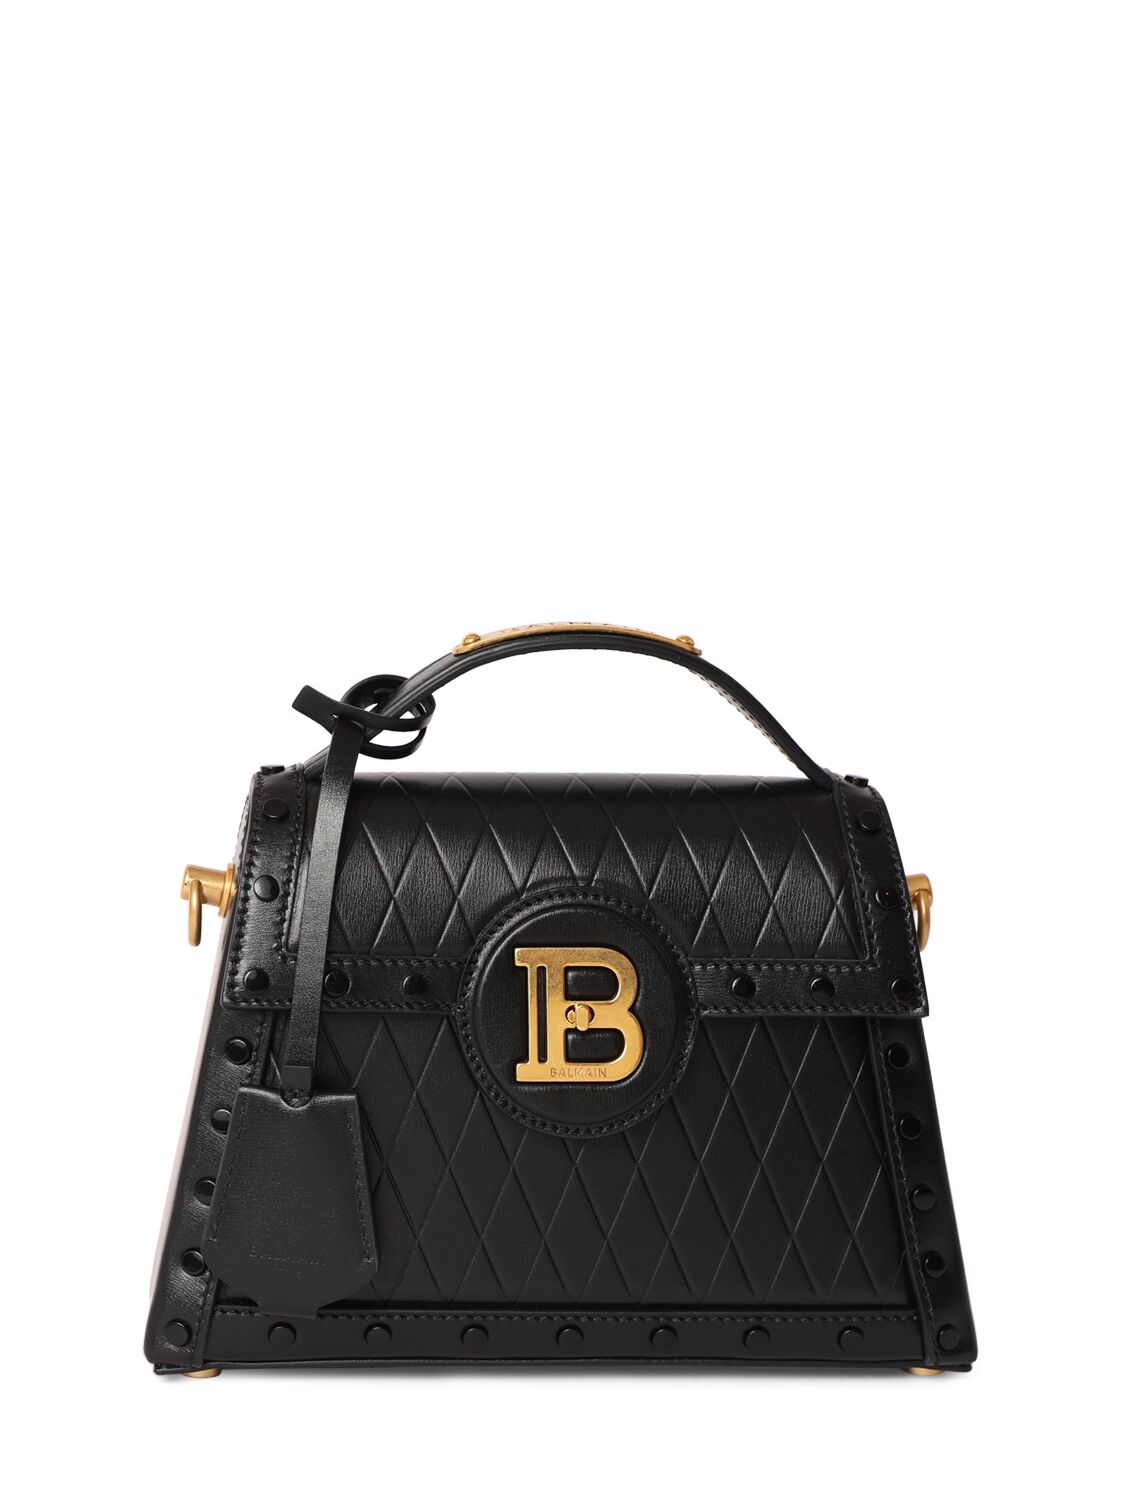 Image of B-buzz Dynasty Embossed Leather Bag